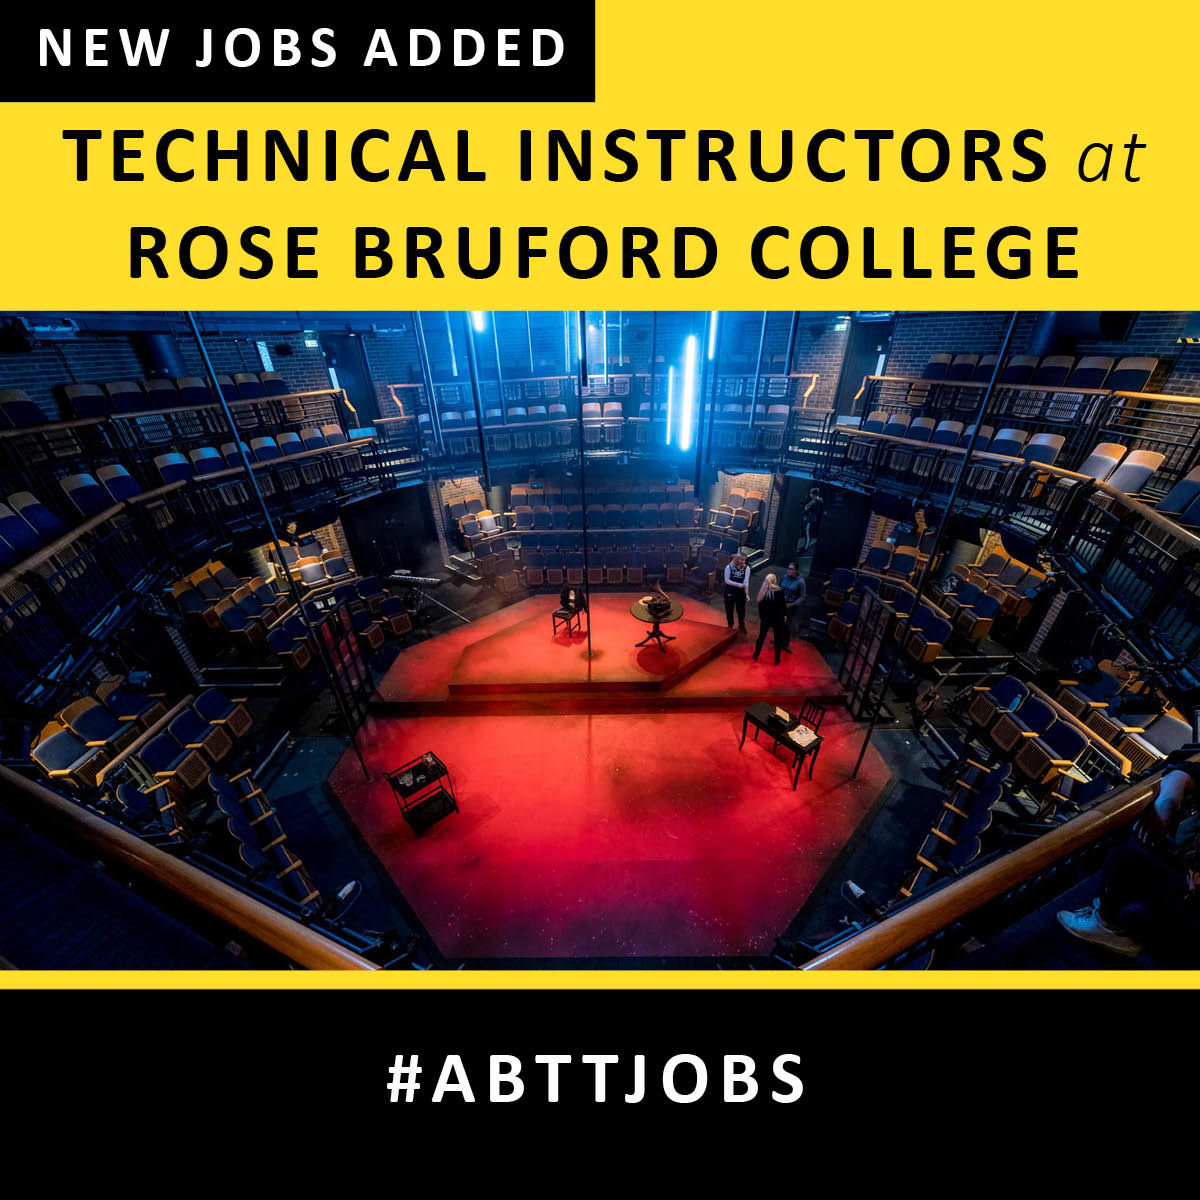 Rose Bruford College is seeking to appoint two technical instructors, providing technical & logistical support. Technical Instructor (Lighting duty cover): abtt.org.uk/jobs/technical… Technical Instructor (Lighting/Rigging duty cover): abtt.org.uk/jobs/technical… #ABTTjobs